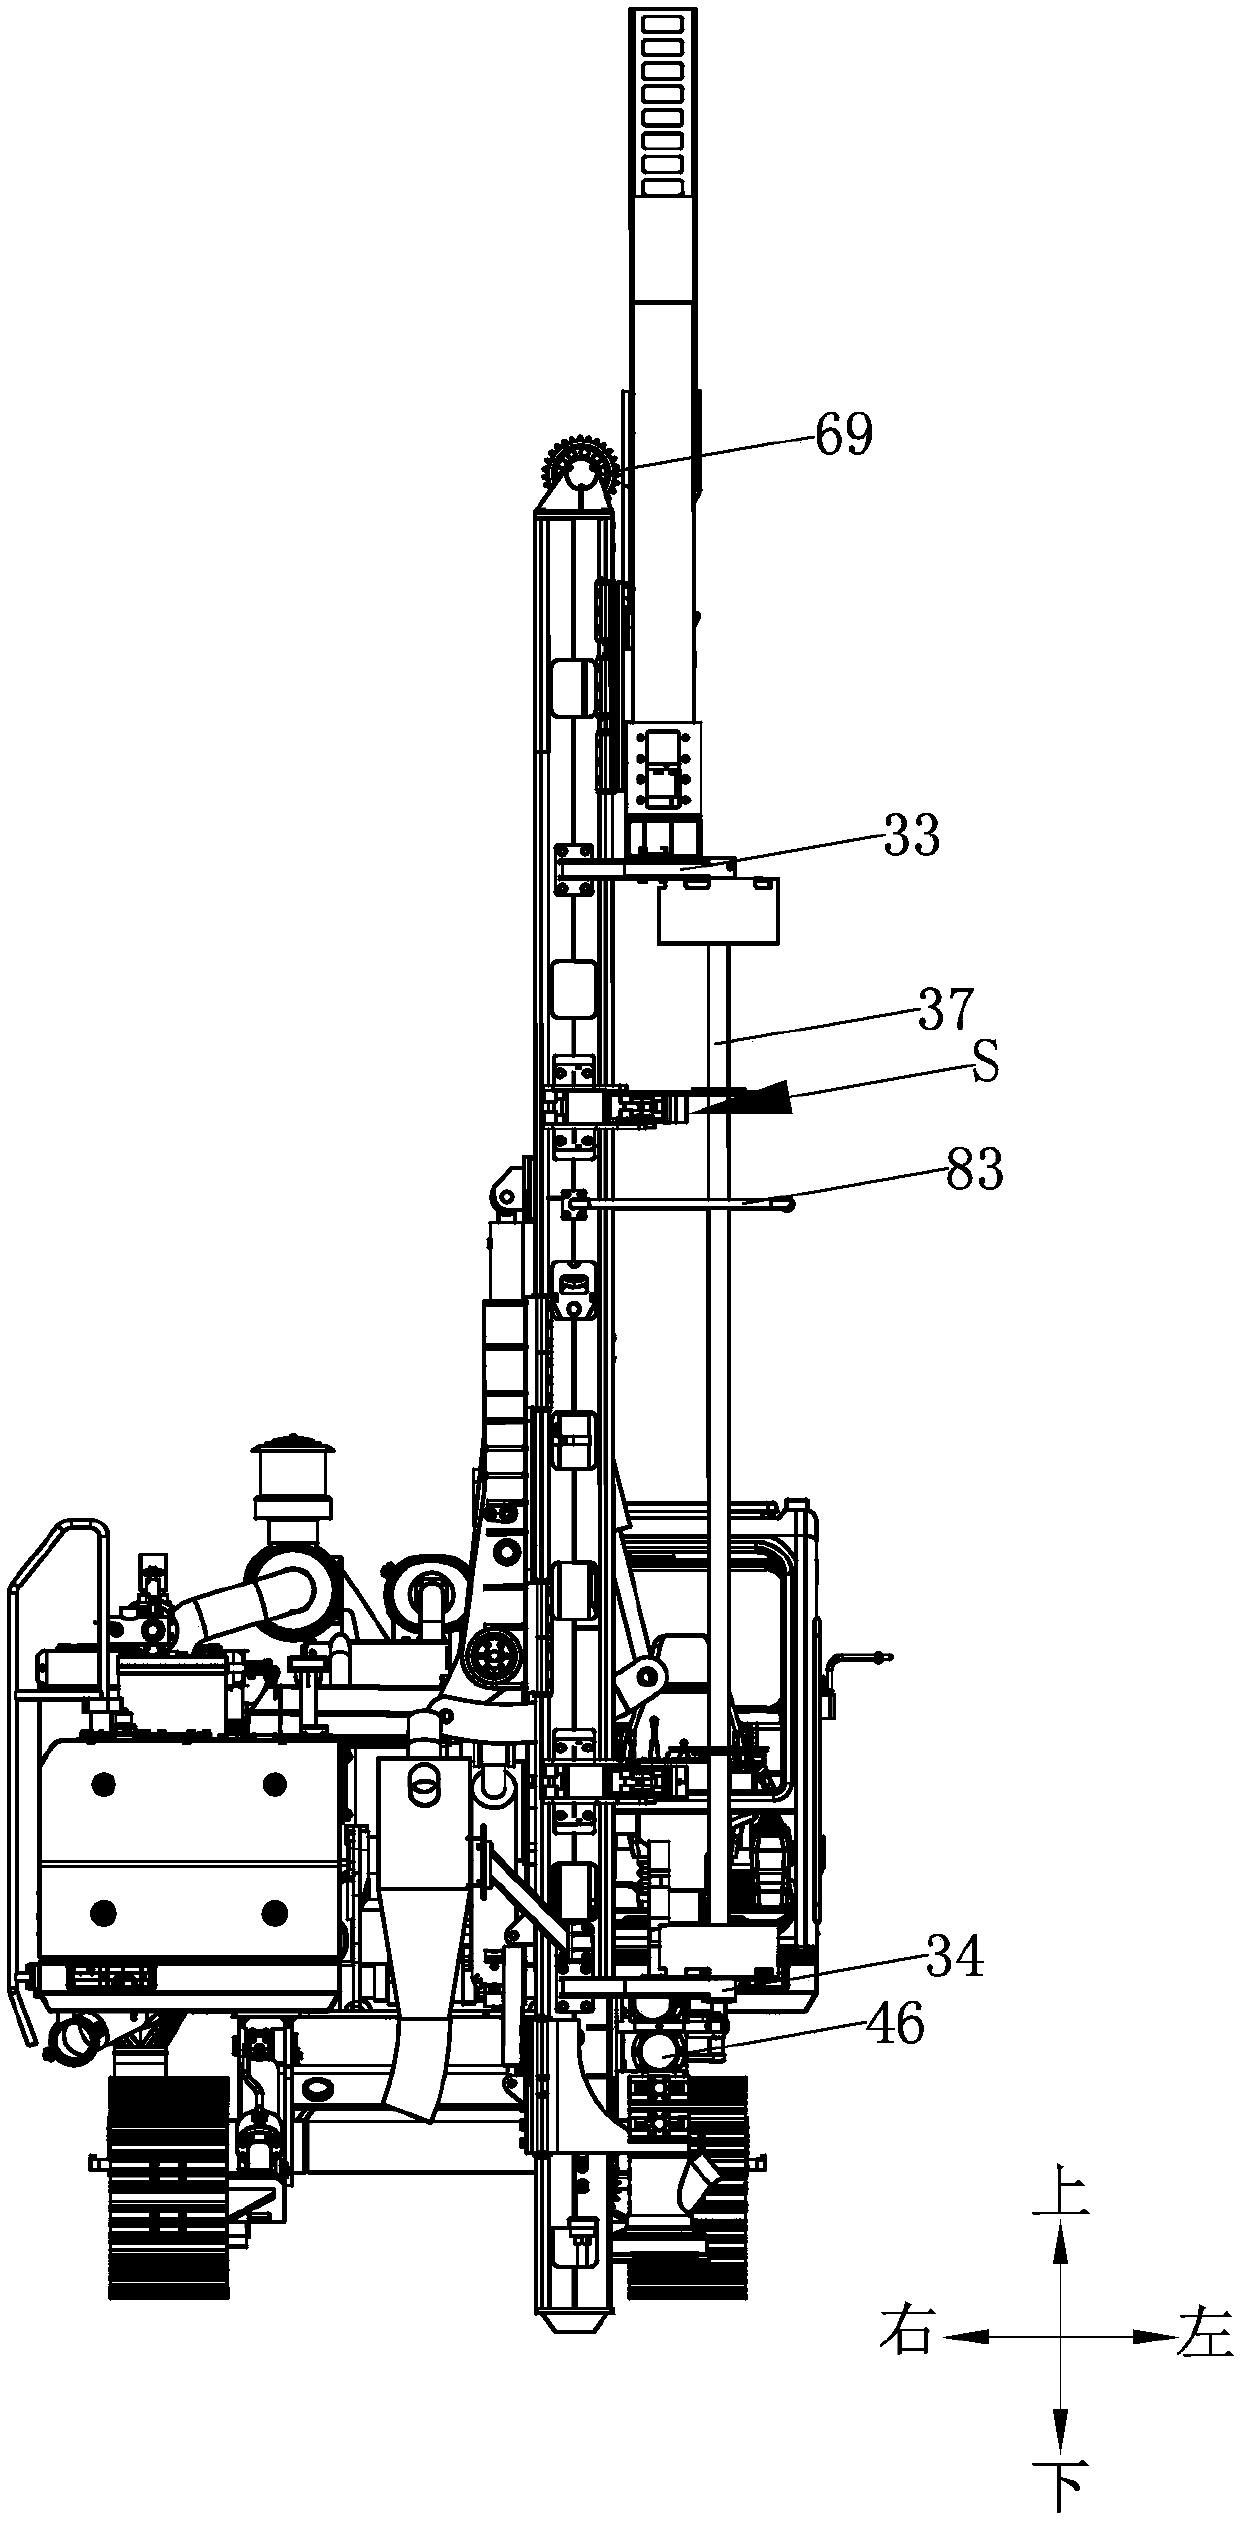 A high-speed hydraulic drilling rig with twin engines